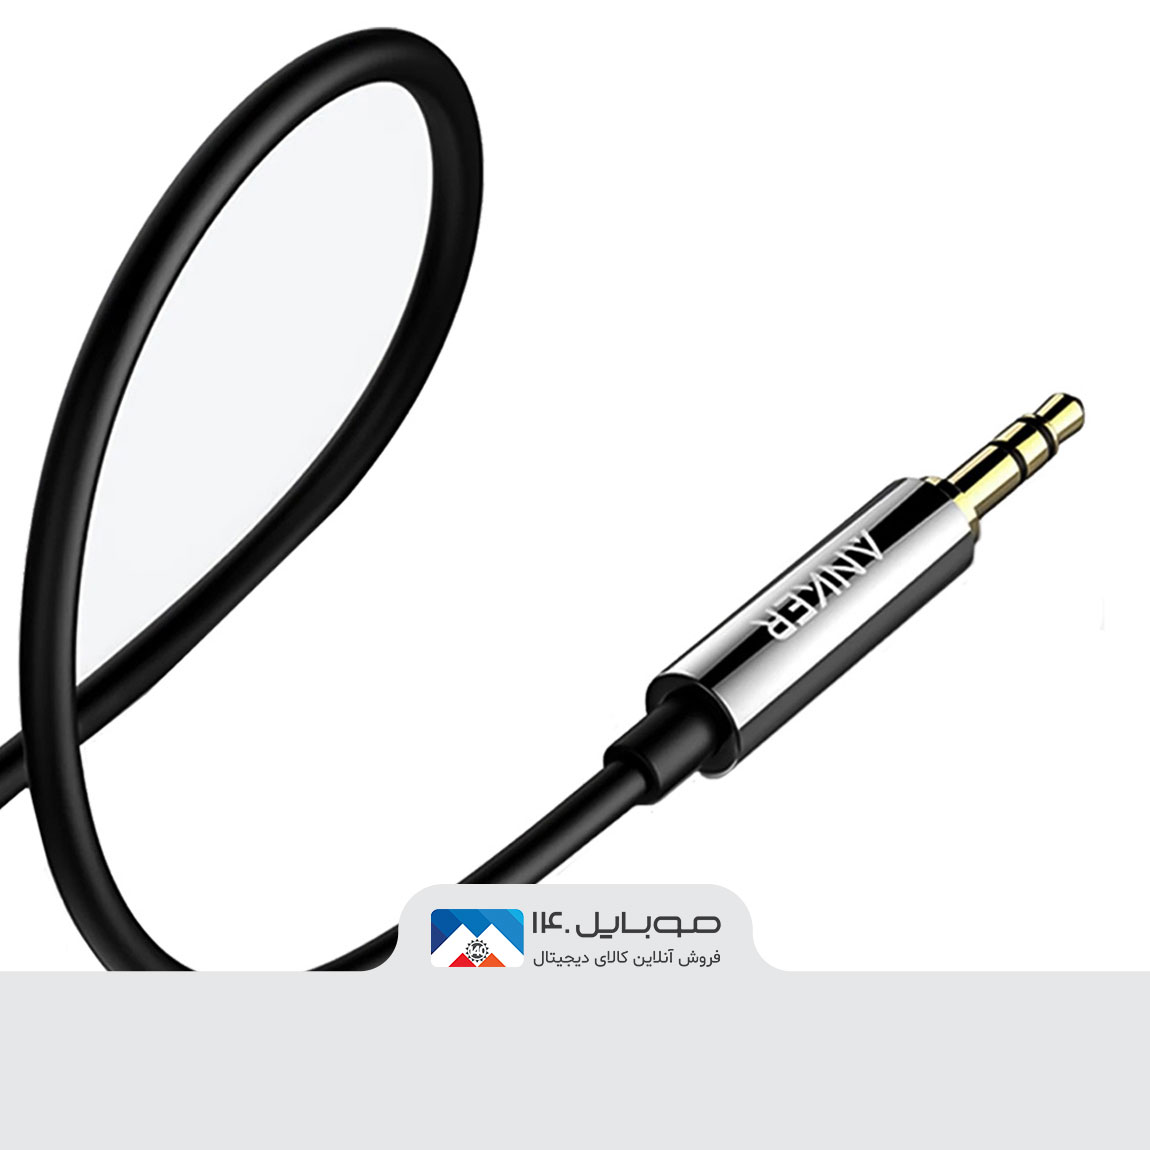 ANKER Auxiliary A7123H12 Audio Cable 1